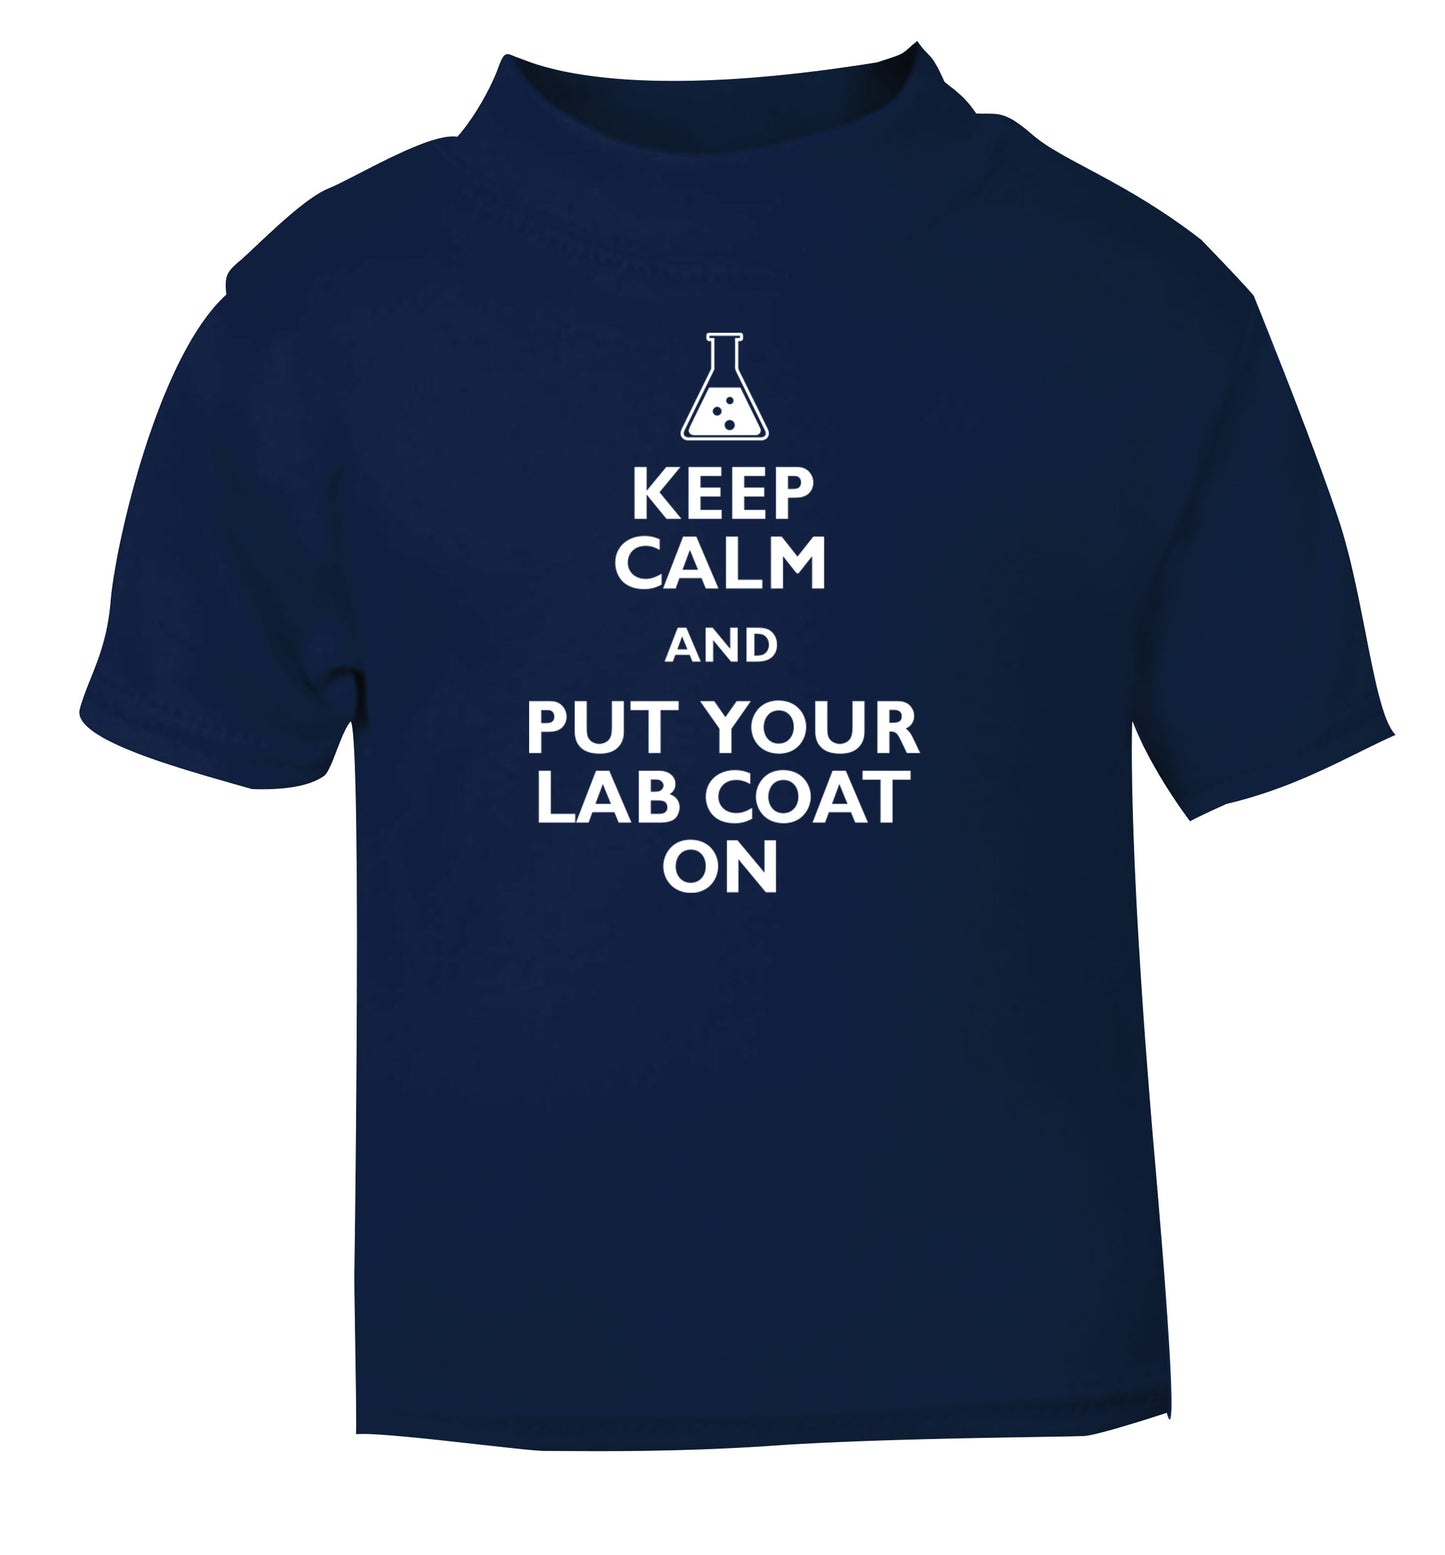 Keep calm and put your lab coat on navy Baby Toddler Tshirt 2 Years